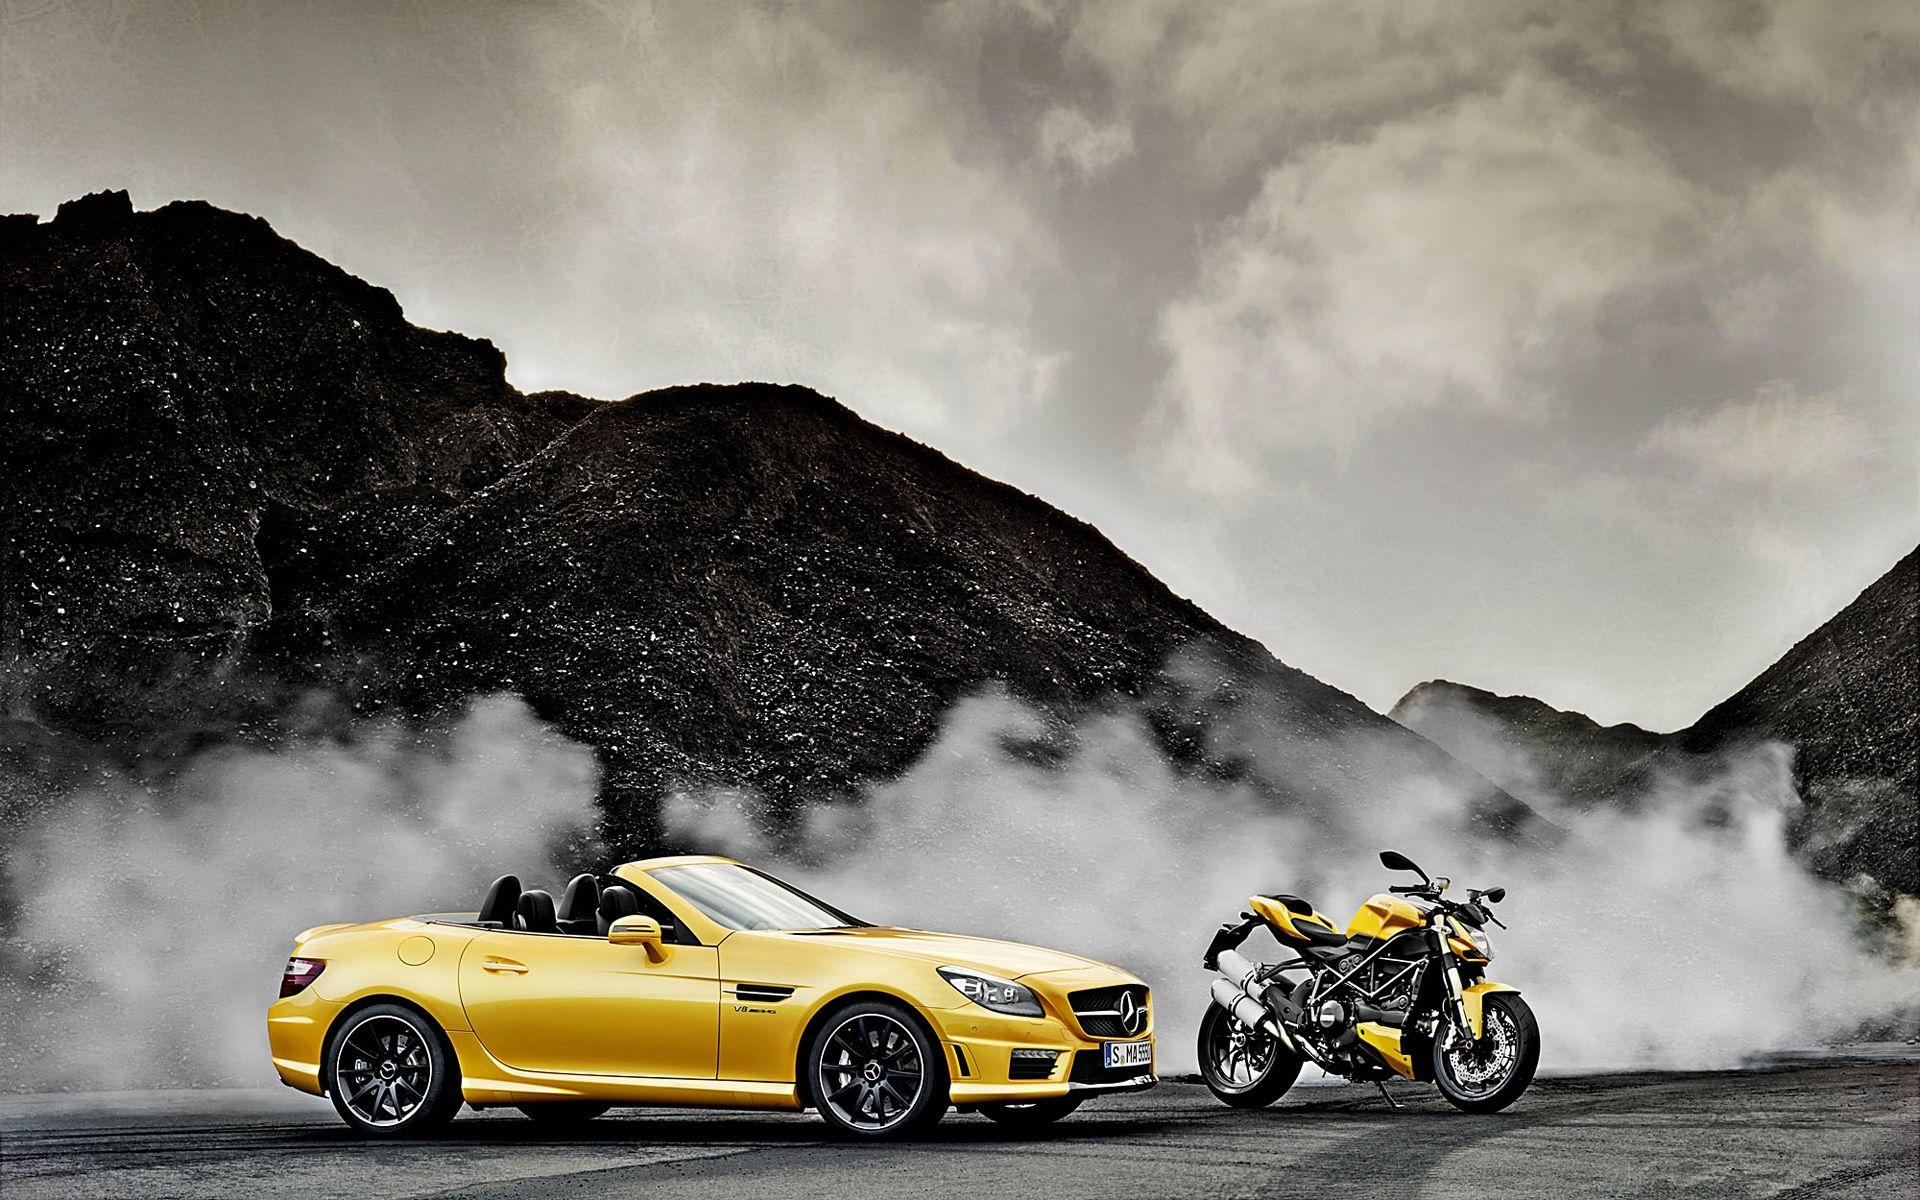 Cars And Bikes Wallpaper (2,400 X 2,400) by benliau0227 on DeviantArt